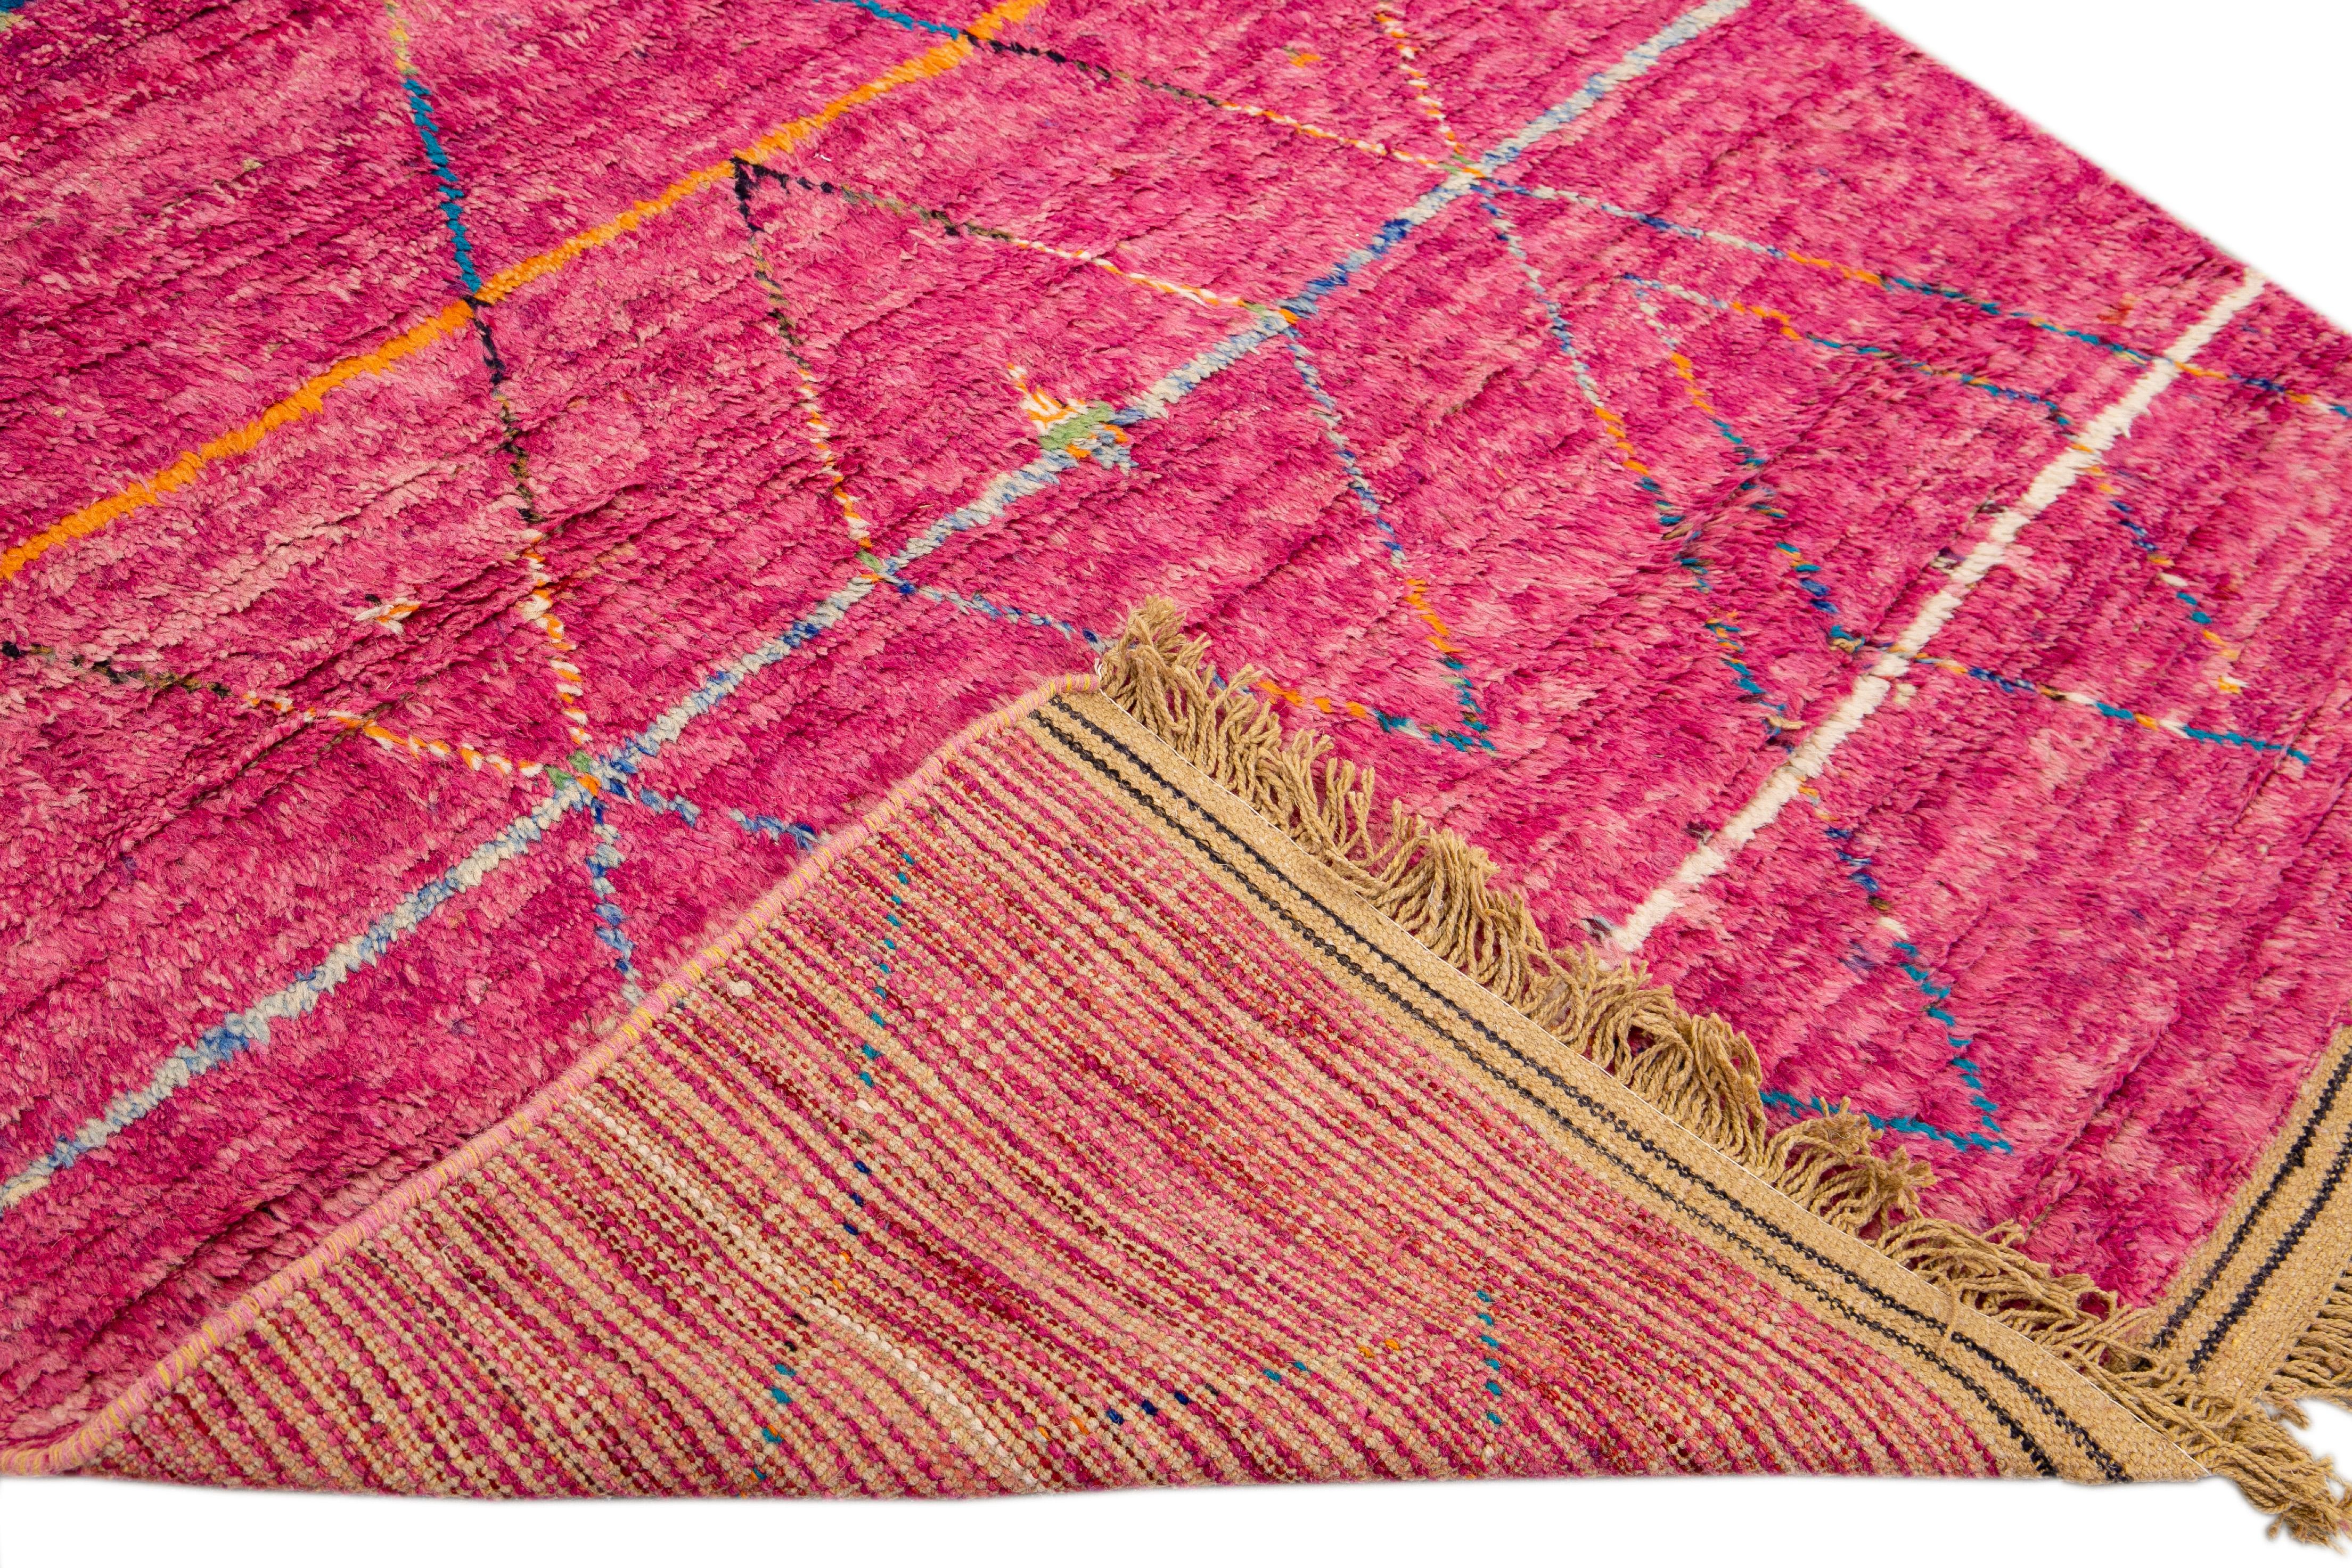 Beautiful Moroccan style handmade wool rug with a pink field. This Modern rug has multicolor accents and tan fringes featuring a gorgeous all-over geometric boho tribal design.

This rug measures: 6' x 9'4